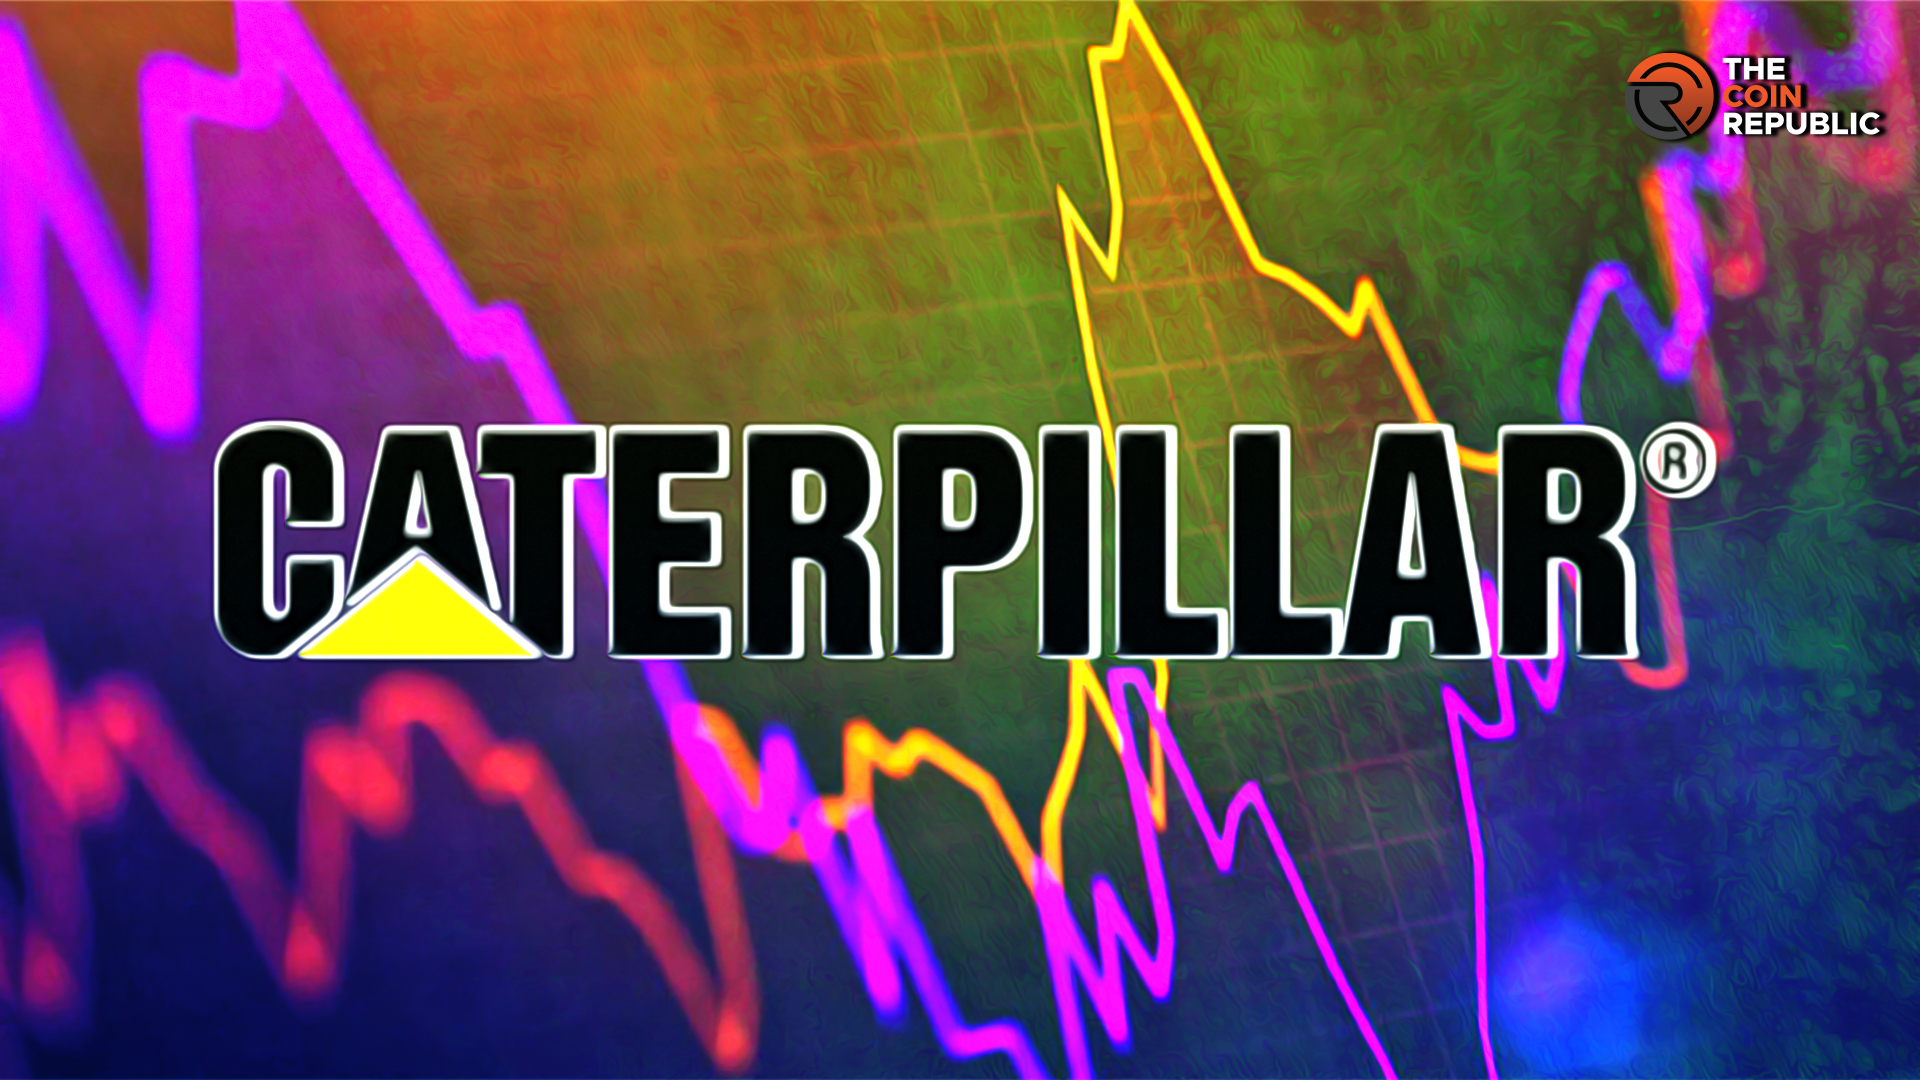 Caterpillar Stock: Will CAT Stock Price Recover Before Earnings?